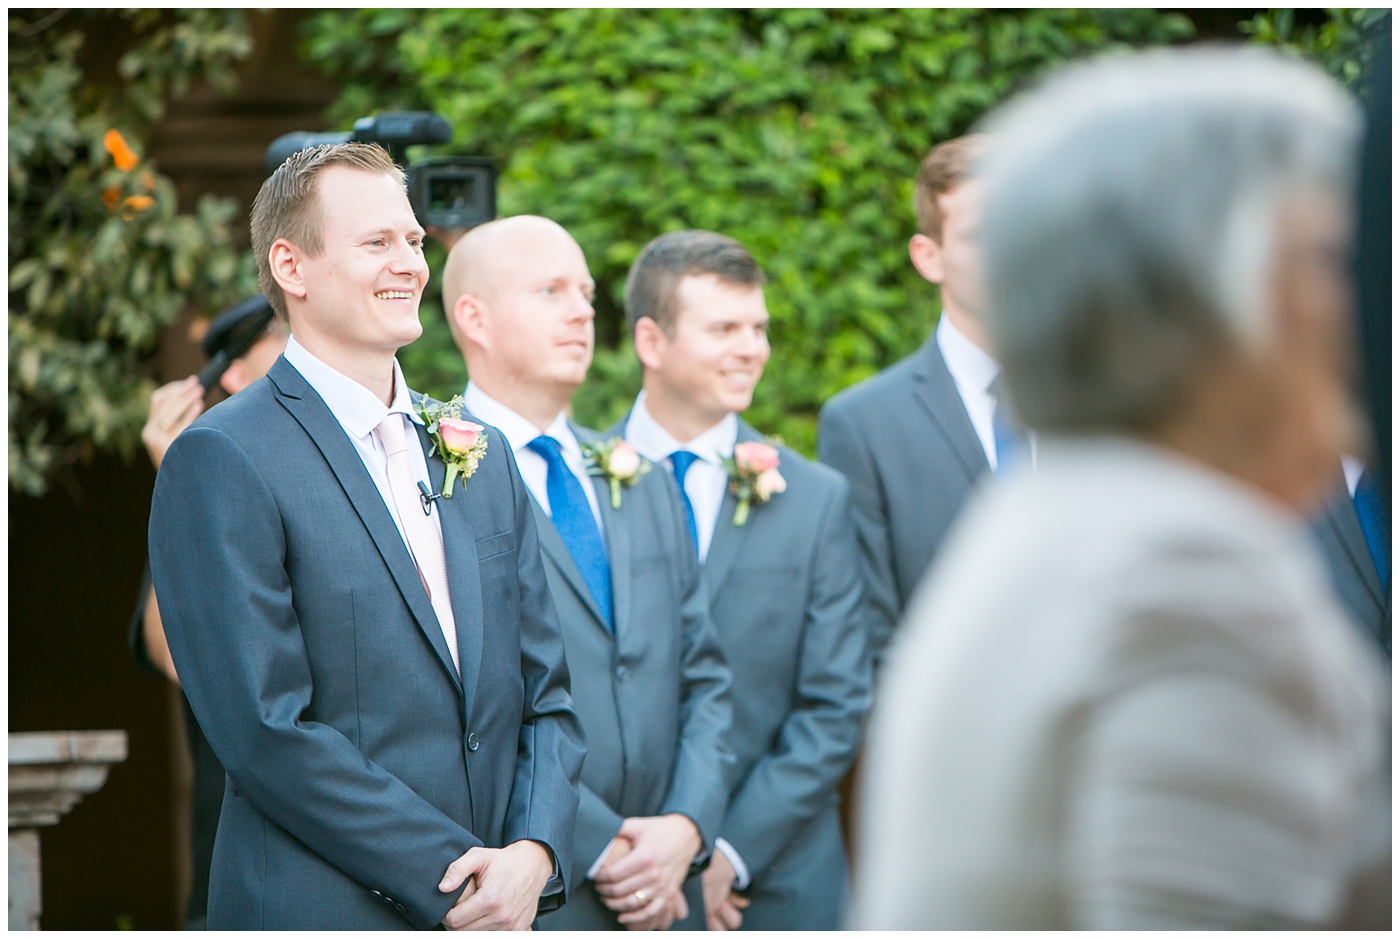 groom in gray suit with pink tie seeing bride walk down the aisle at wedding ceremony